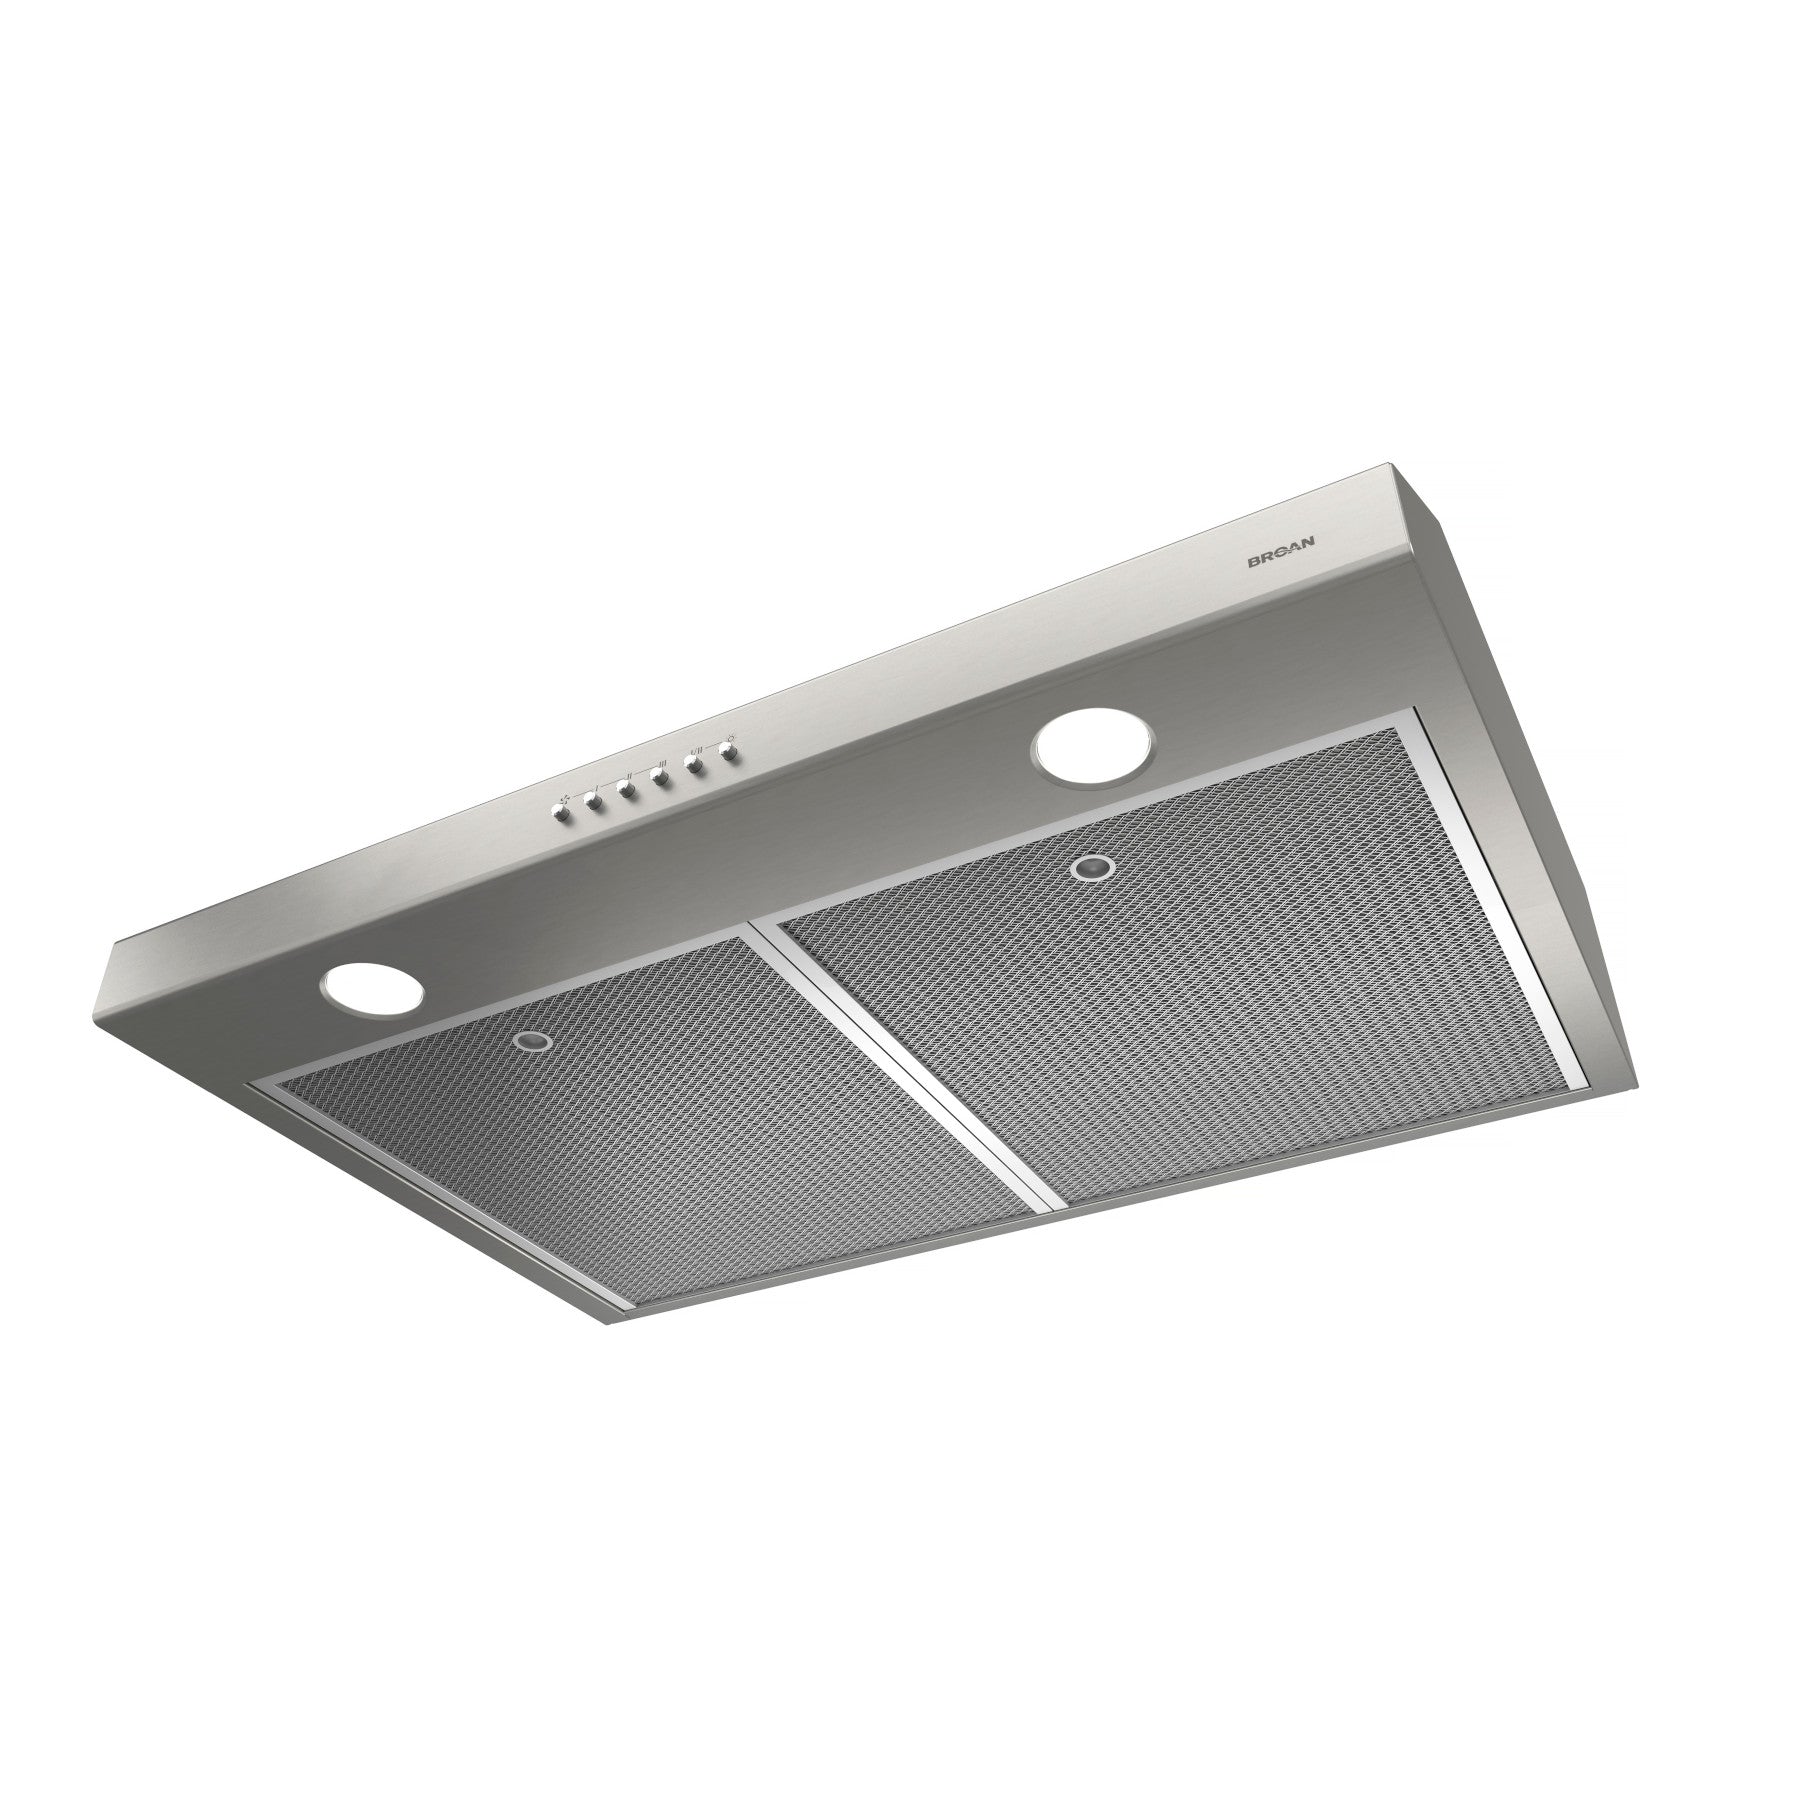 Broan - 30 Inch 375 CFM Under Cabinet Range Vent in Stainless - BCSM130SS